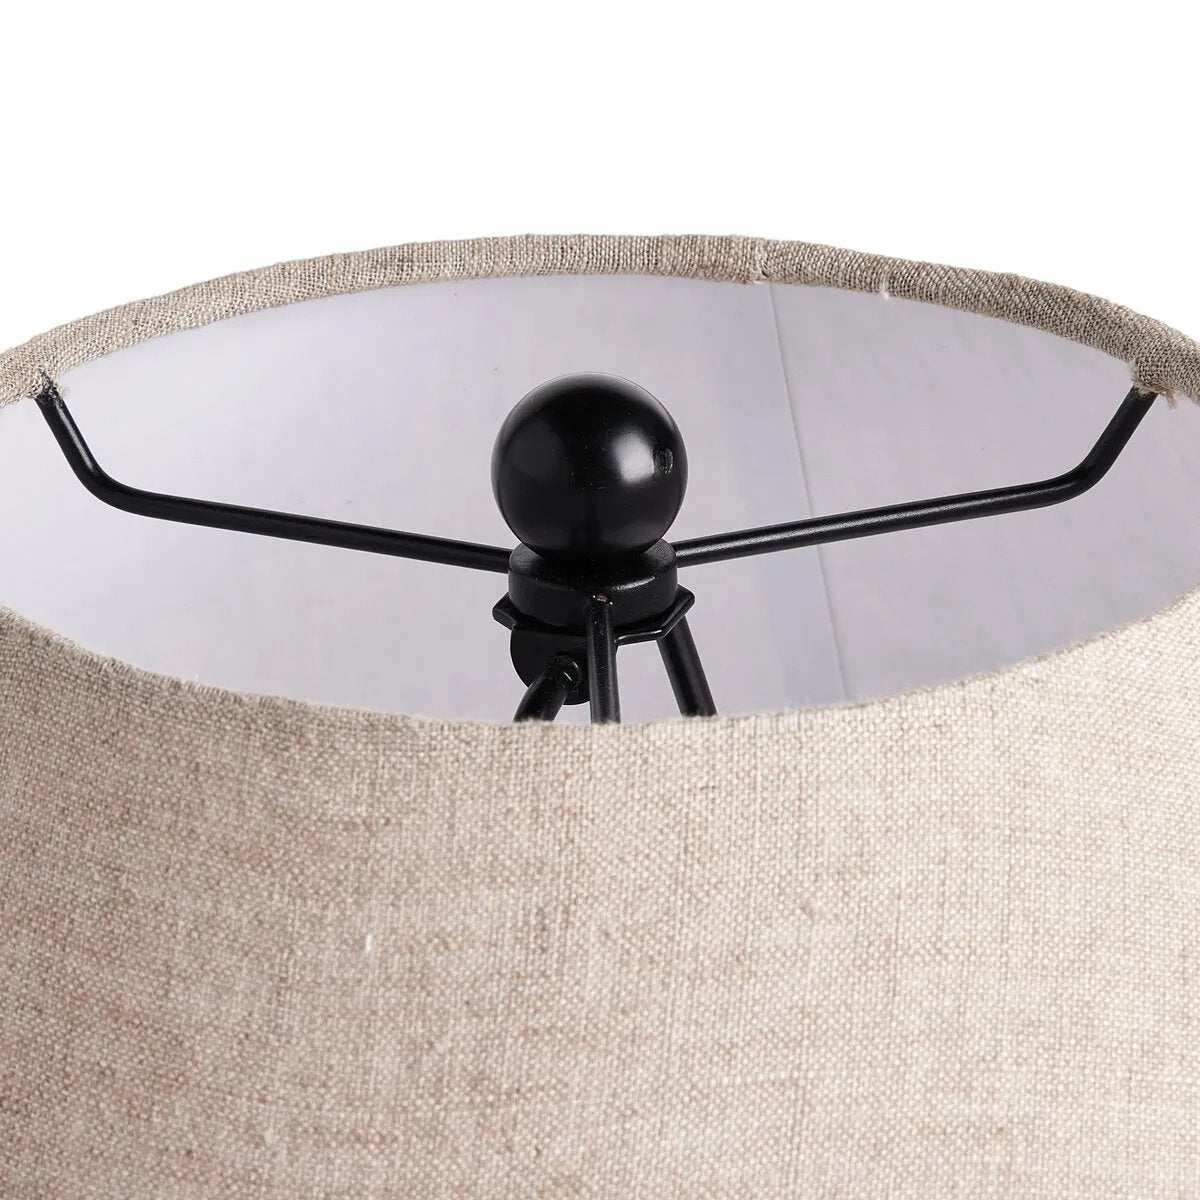 In this black terra cotta vase table lamp, each piece bears unique touches from its natural finishing process. Topped with a shade of natural linen, for a textural contrast.Collection: Rockwel Amethyst Home provides interior design, new home construction design consulting, vintage area rugs, and lighting in the Laguna Beach metro area.